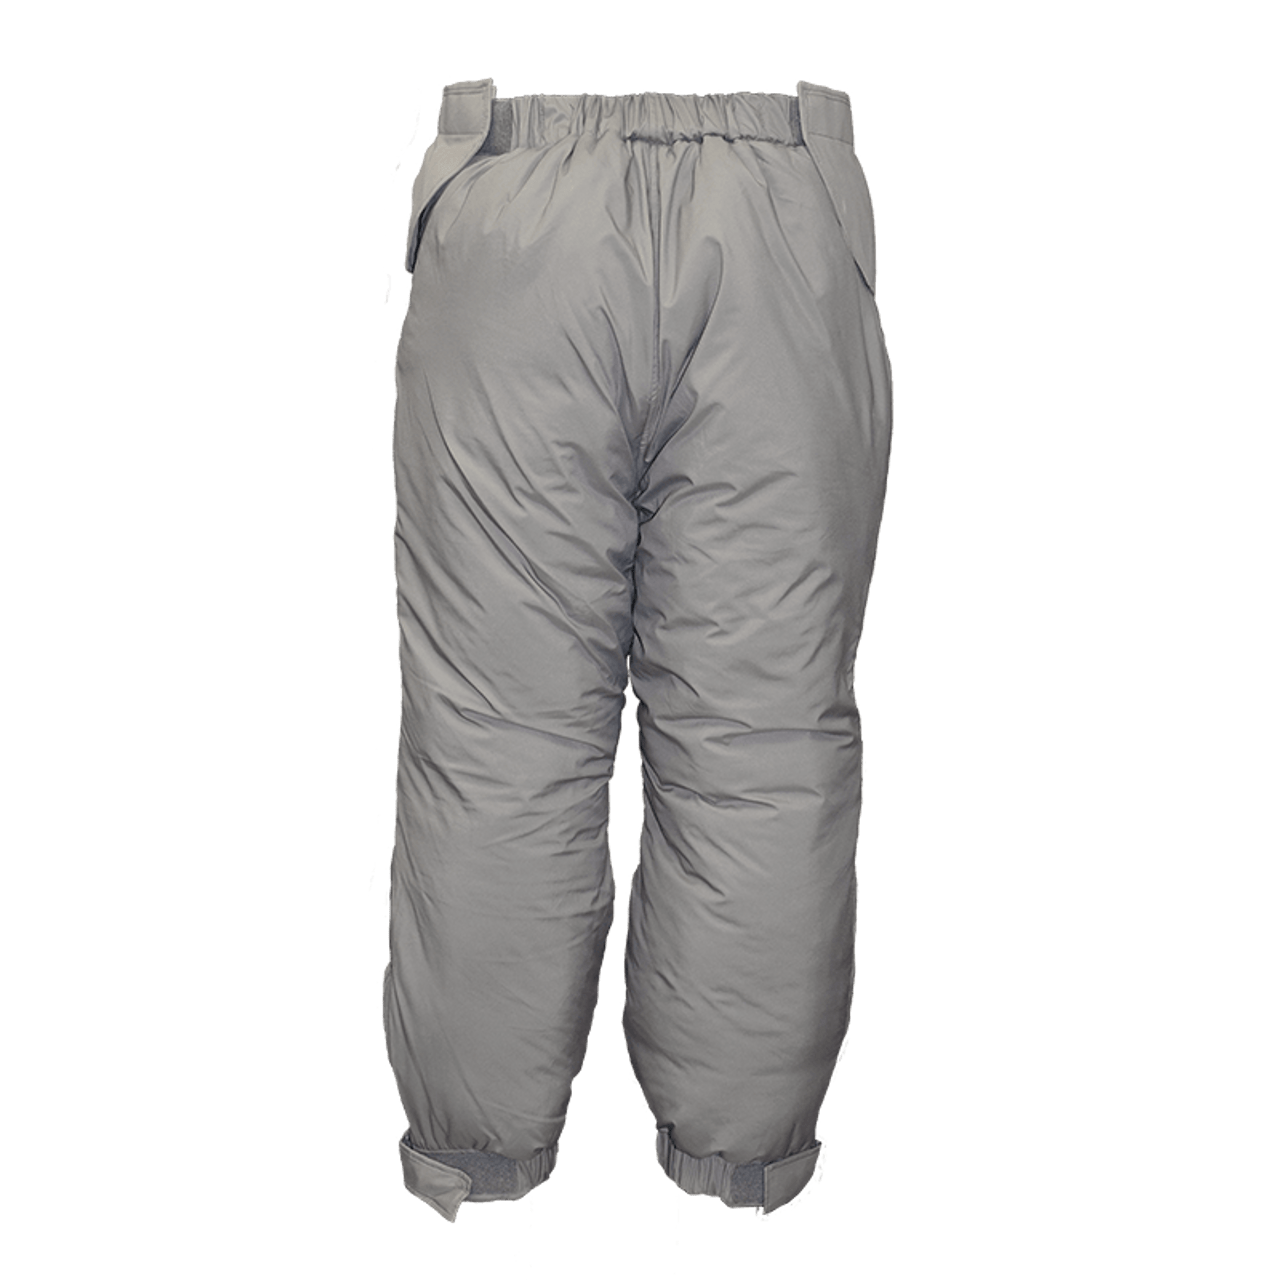 US NAVY MILITARY DECK PANTS IMPERMEABLE EXTREME COLD WEATHER